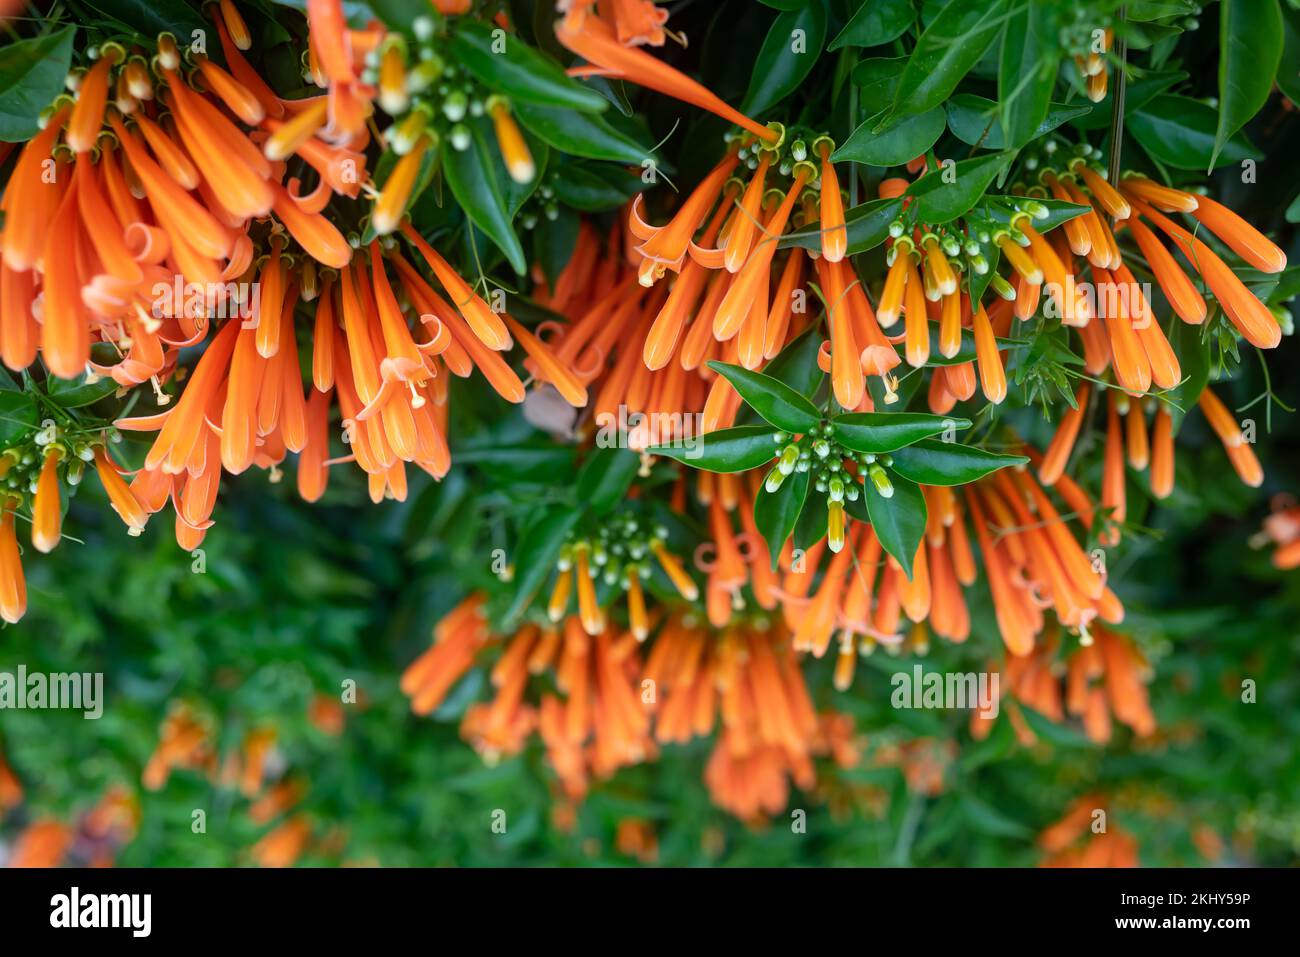 Orange flowers and green leaves summer background. Flamevine blossoms closeup Stock Photo